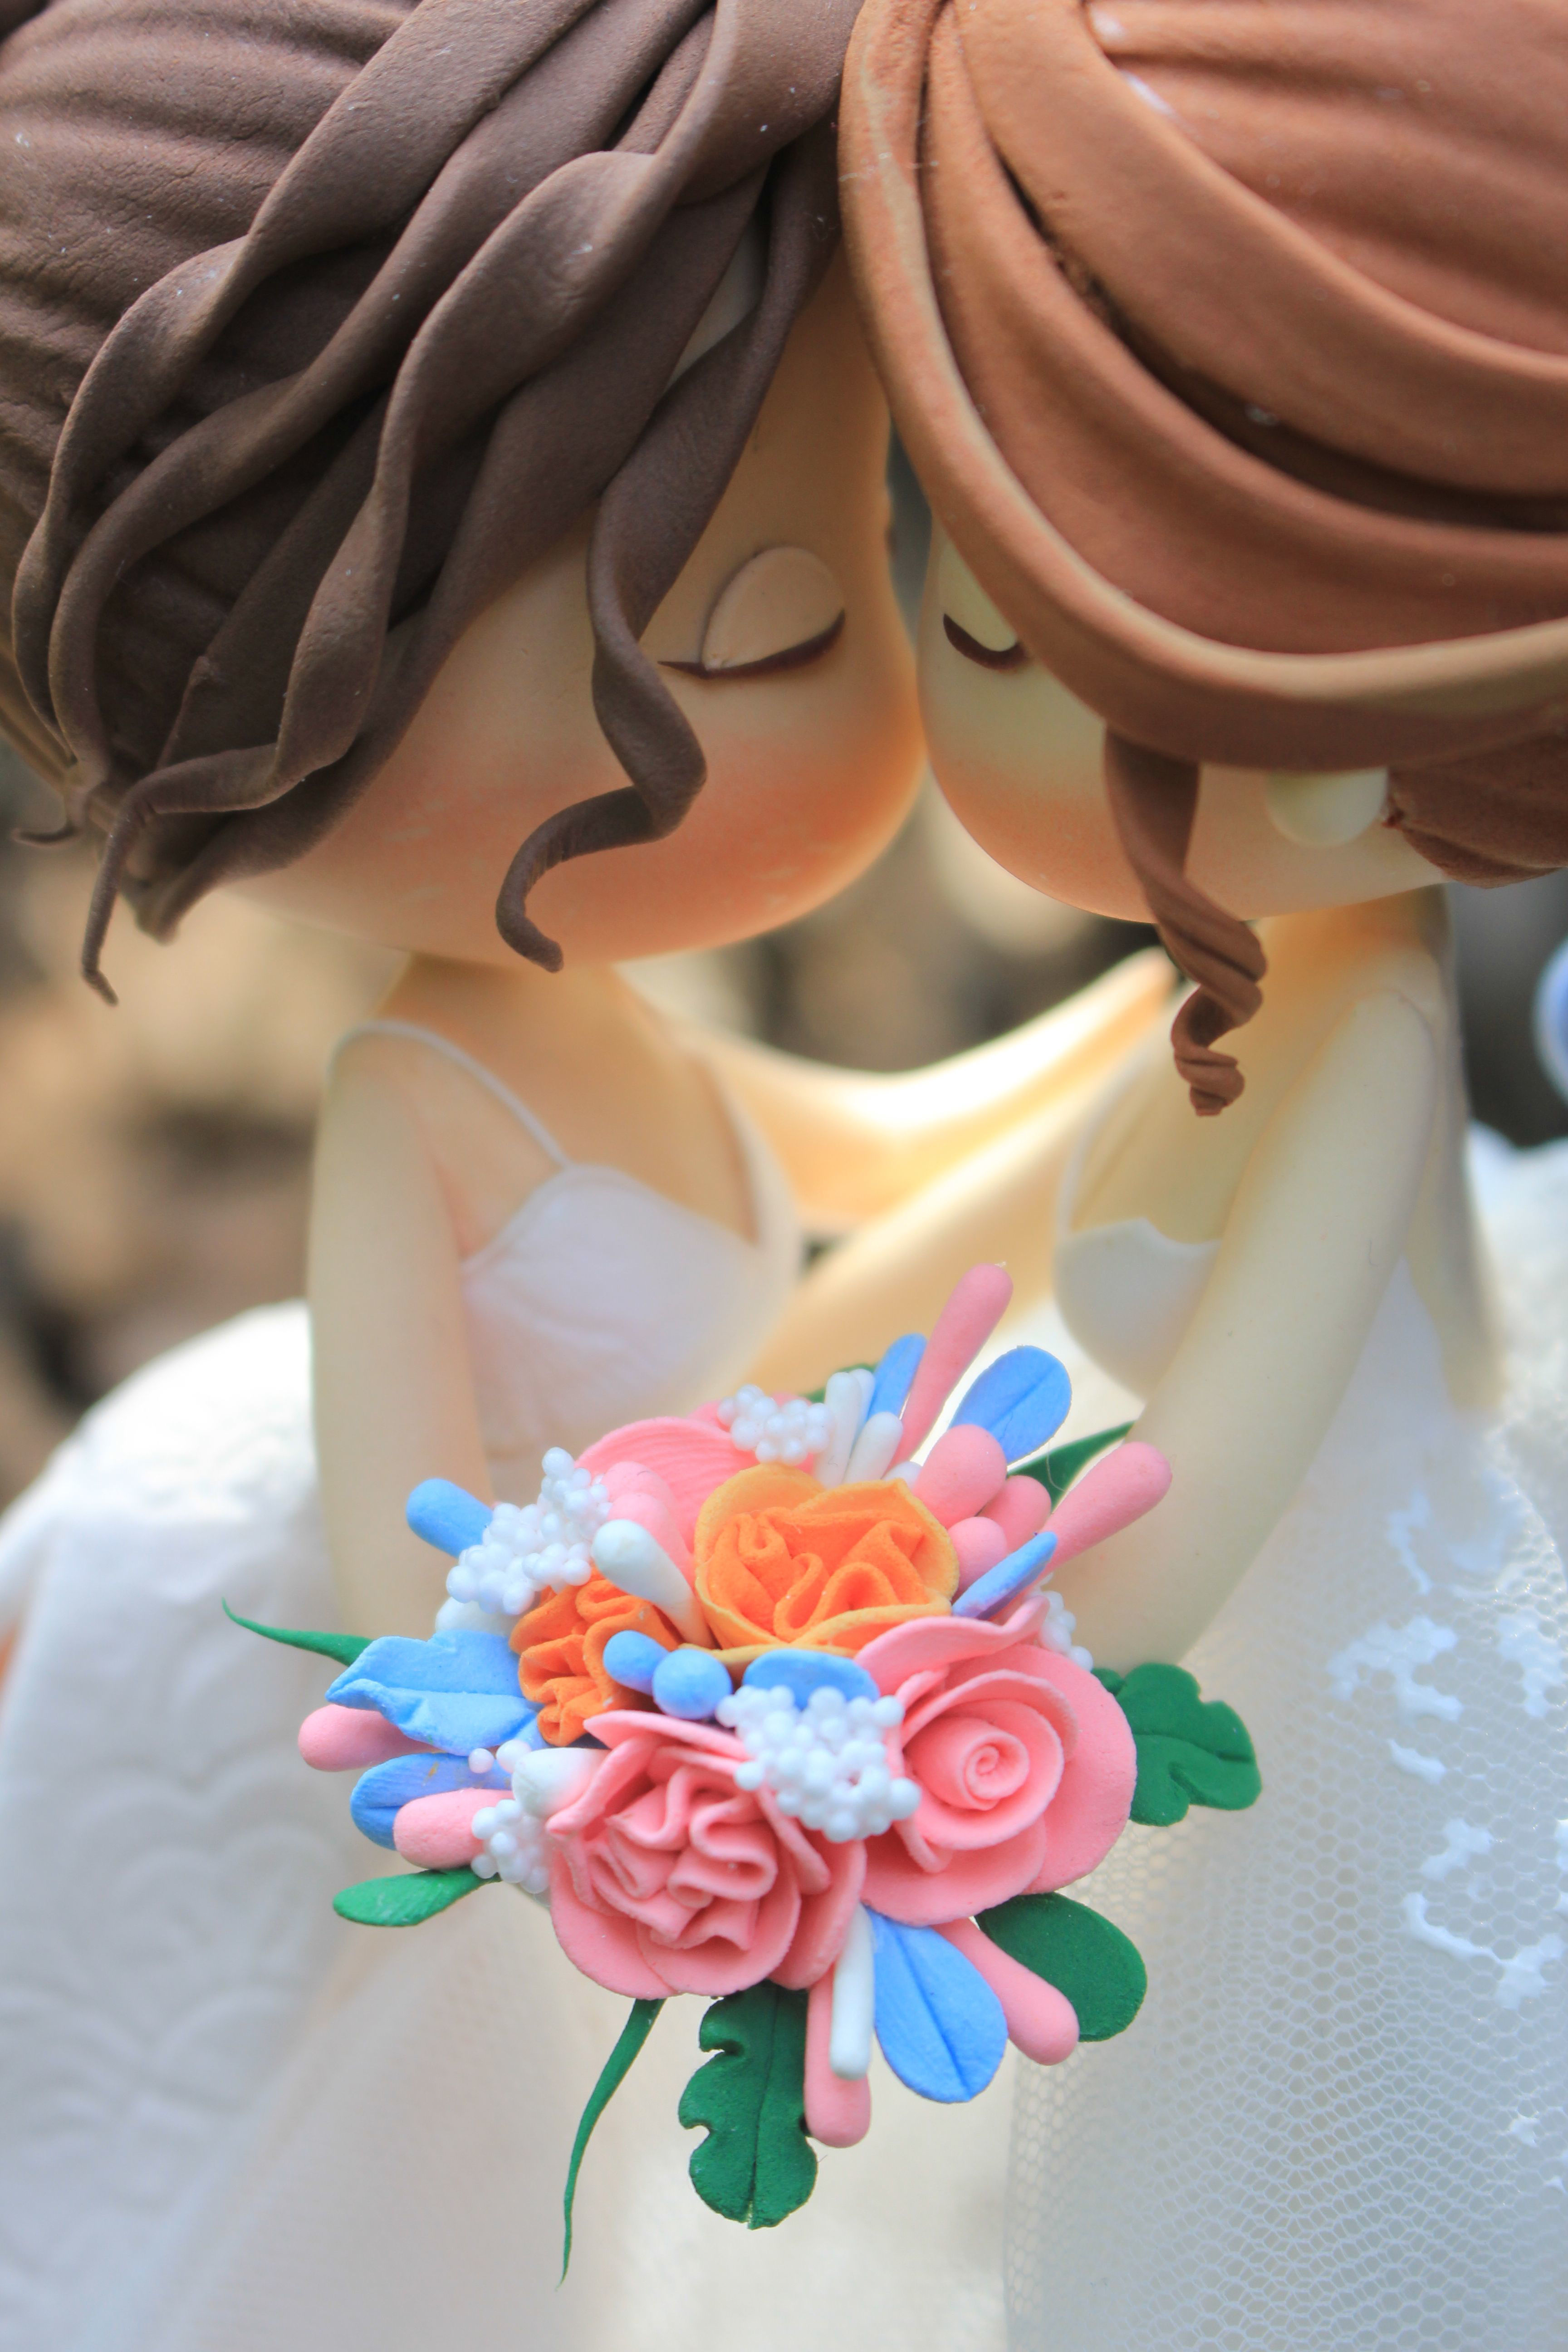 Mrs and Mrs cake topper Lesbian wedding cake topper 2 Bride cake topper Lesbian cake topper with surname and personalized hairstyle L008